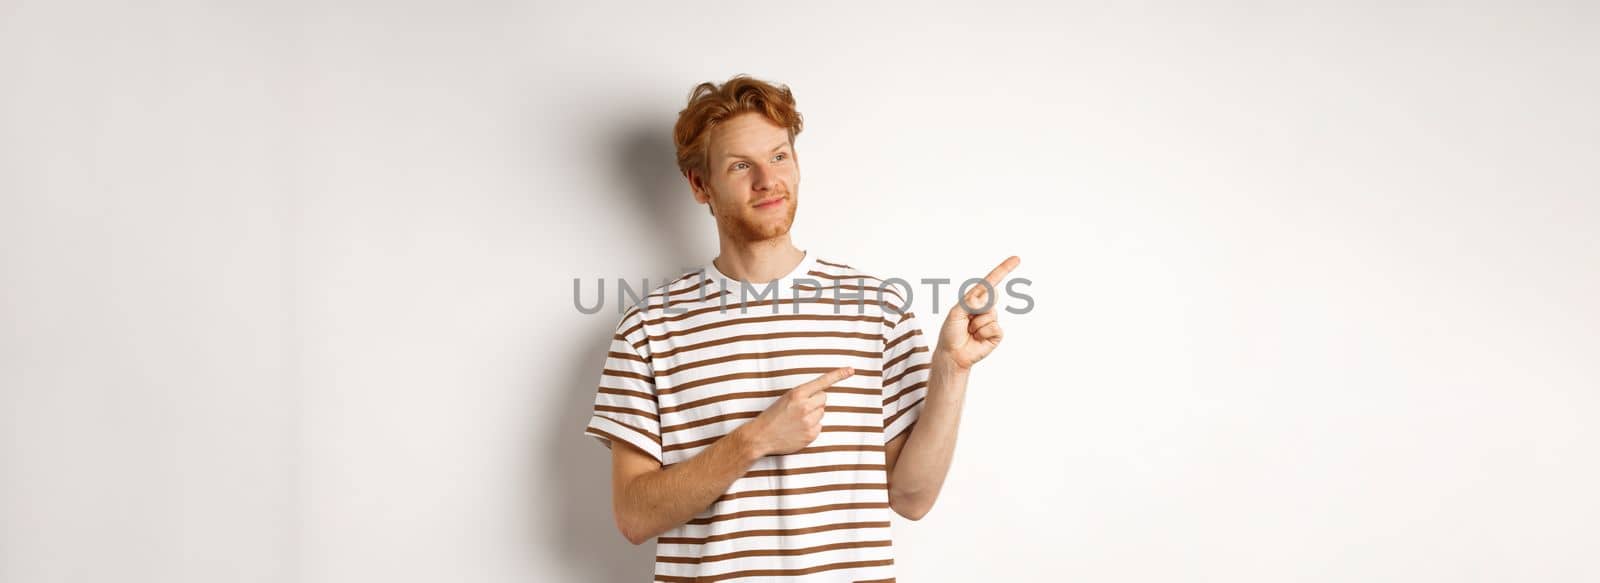 Smiling man with curly red hair, wearing striped t-shirt, smiling and pointing fingers left, demonstrate banner, standing over white background.